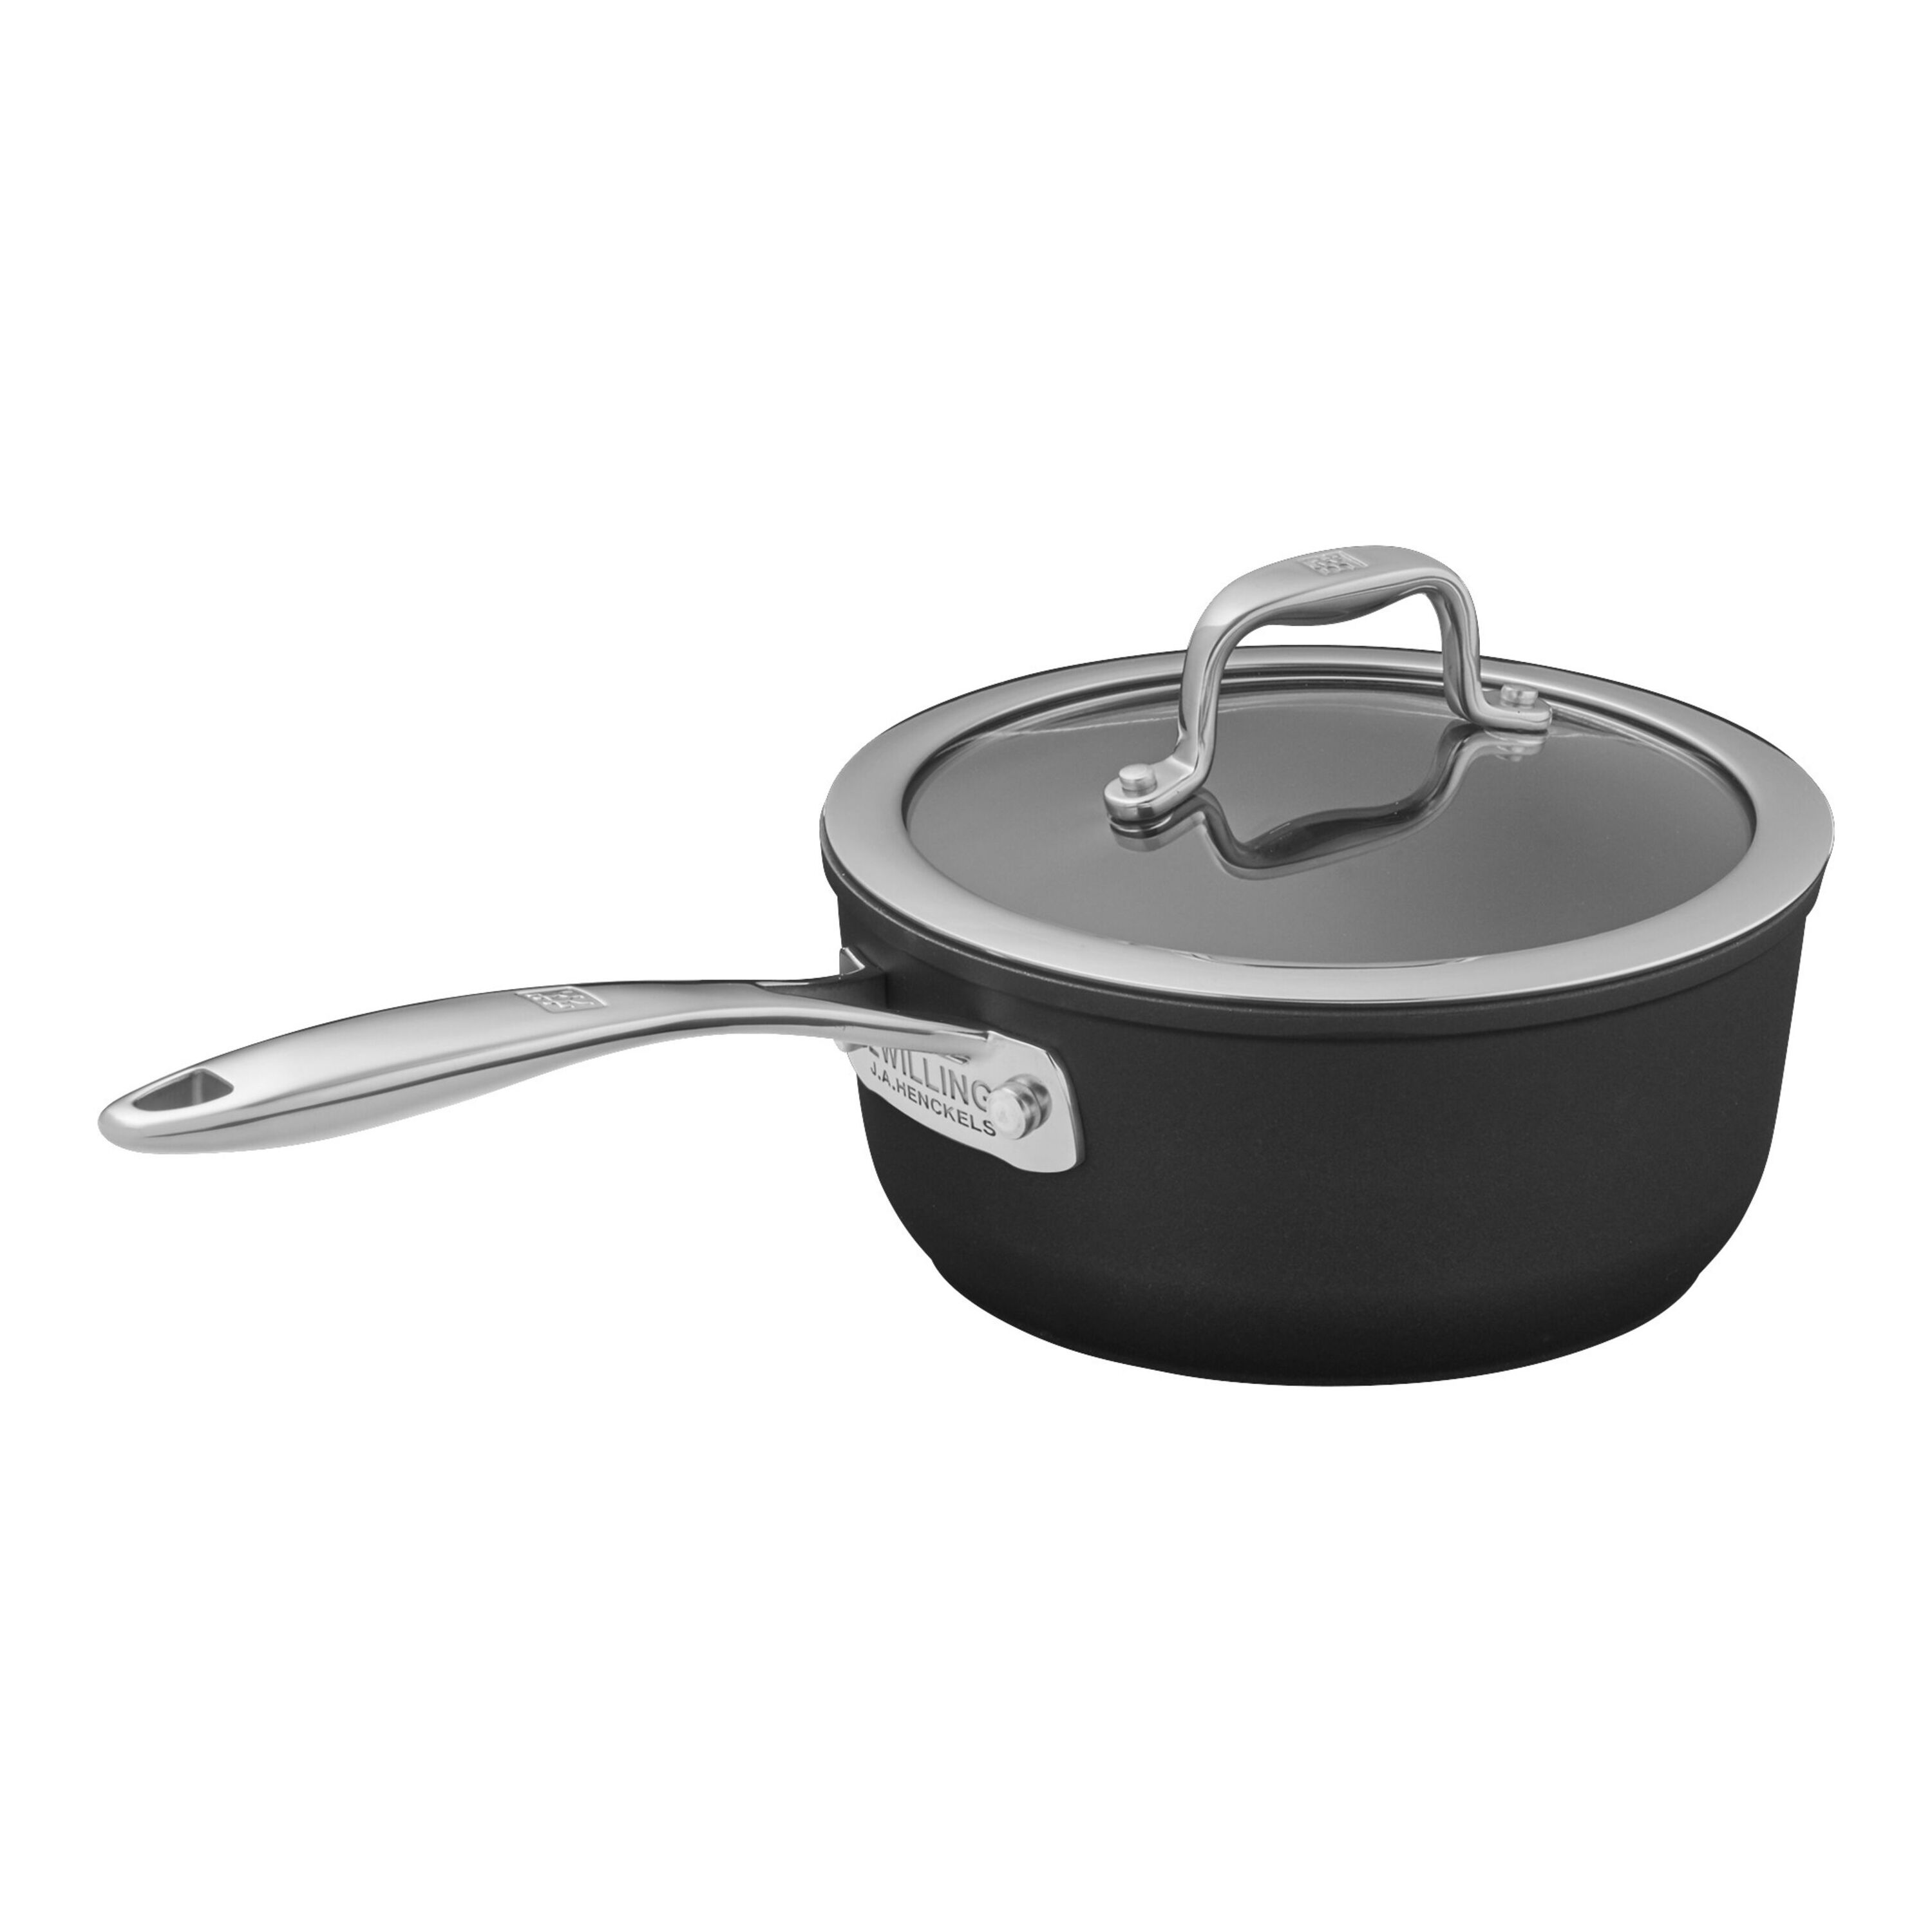 Frieling Woll Sauce Pan w/ Lid, Non-Stick